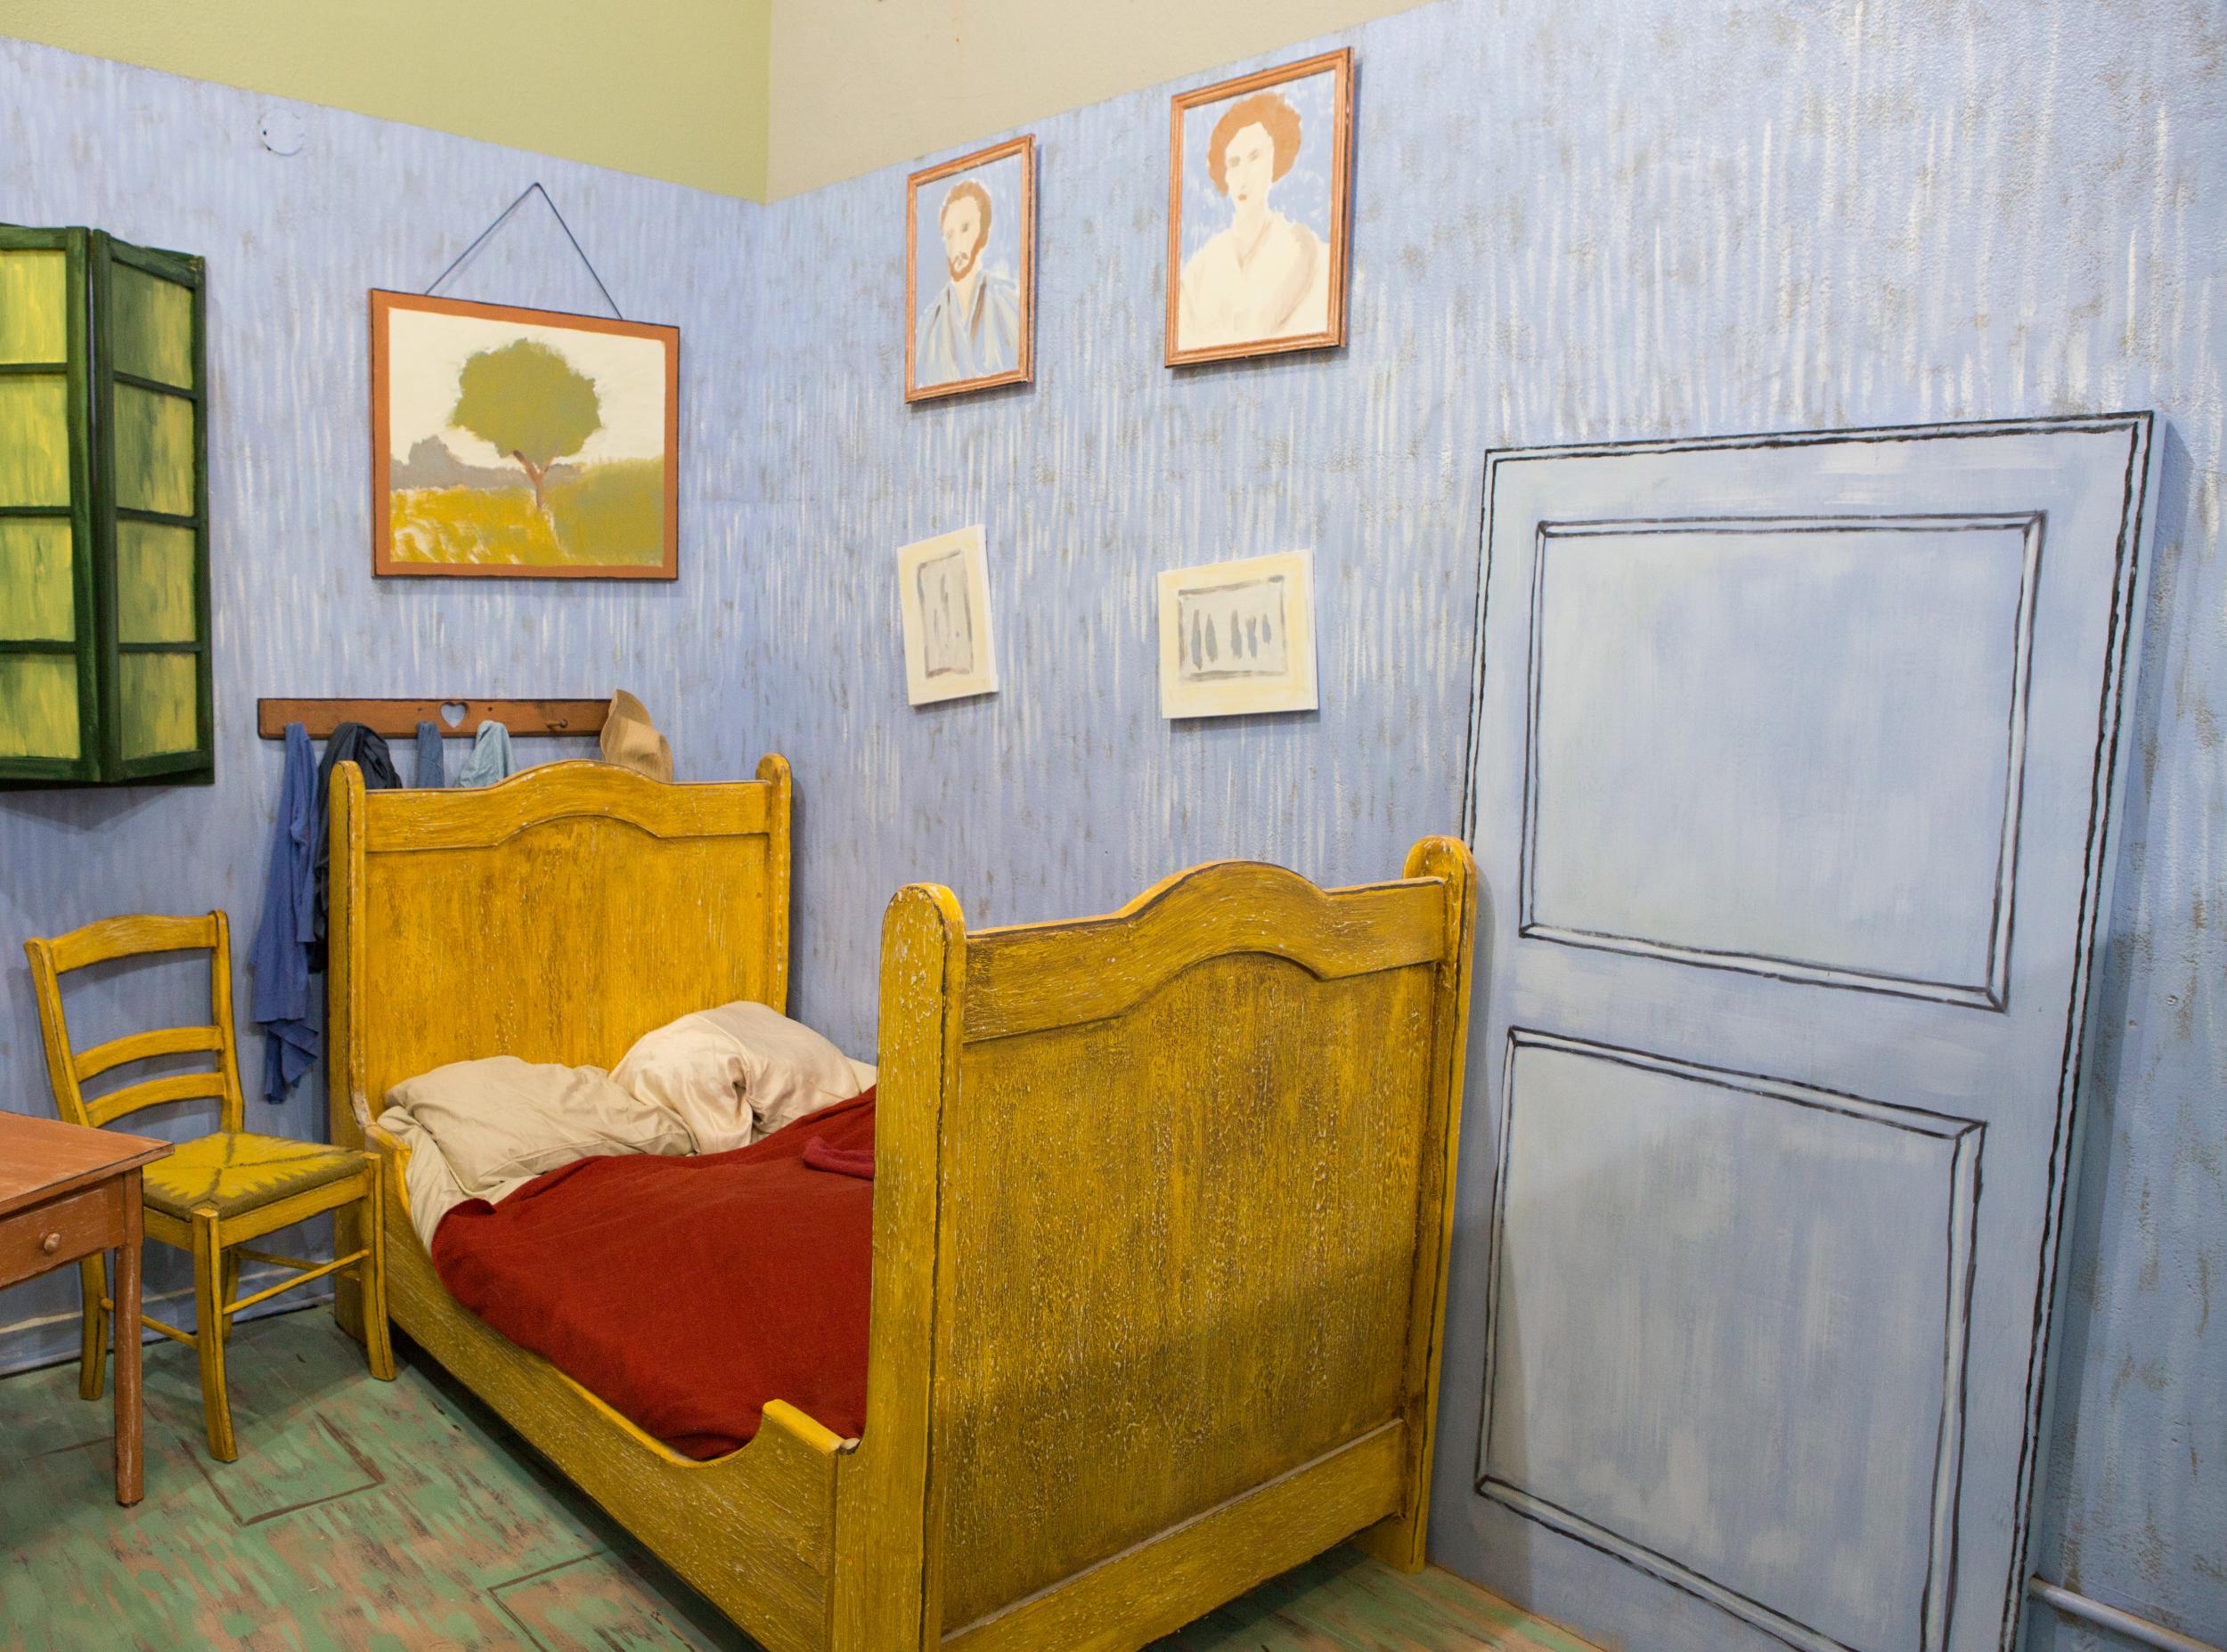 Room for one more: step inside a Van Gogh painting